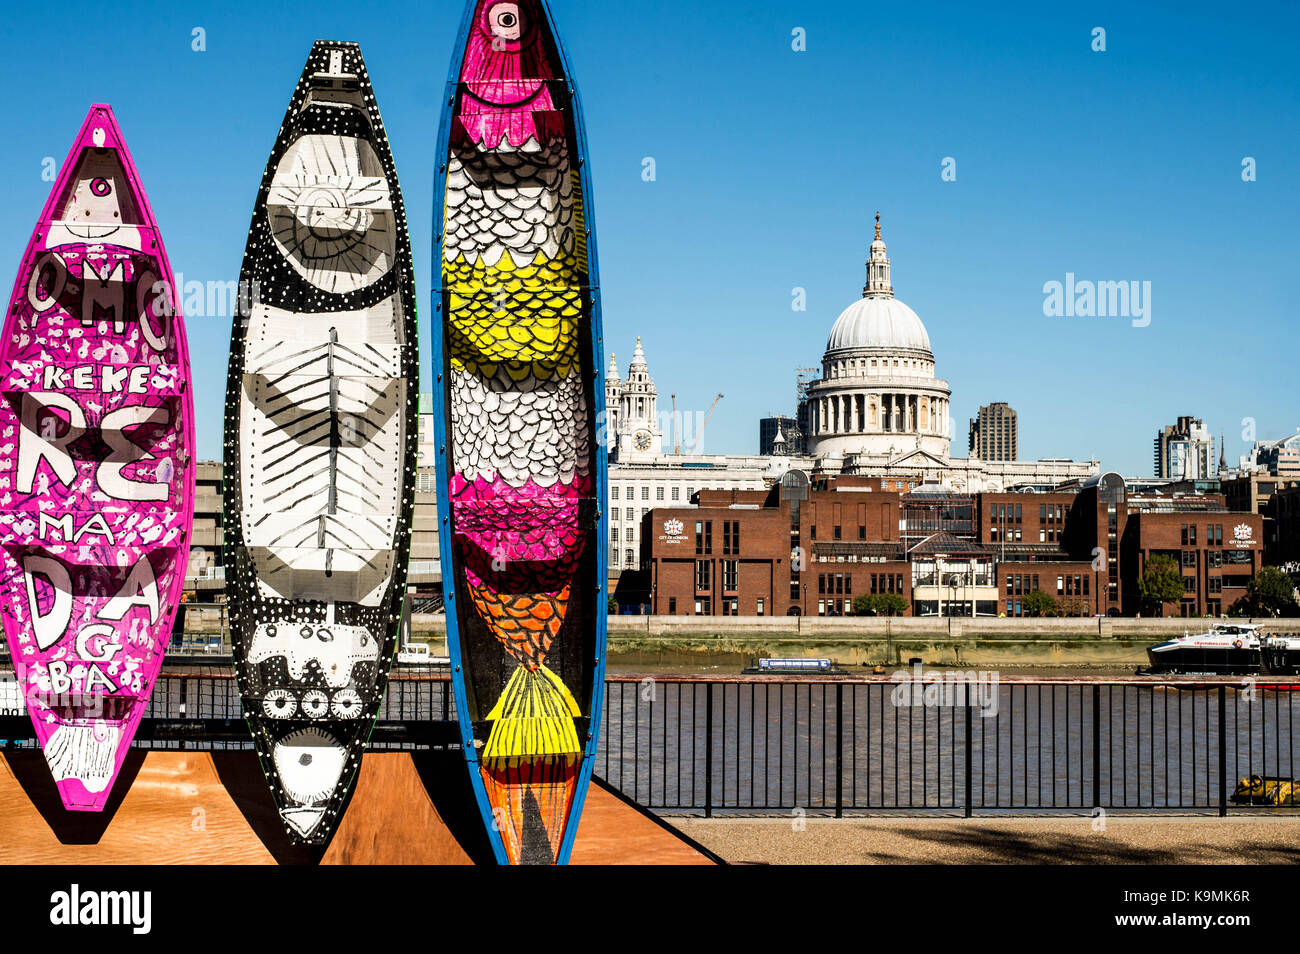 Display of Colourful Decorated Wooden Canoes on the South Bank of the Thames Opposite the Tate Modern Art Gallery Stock Photo